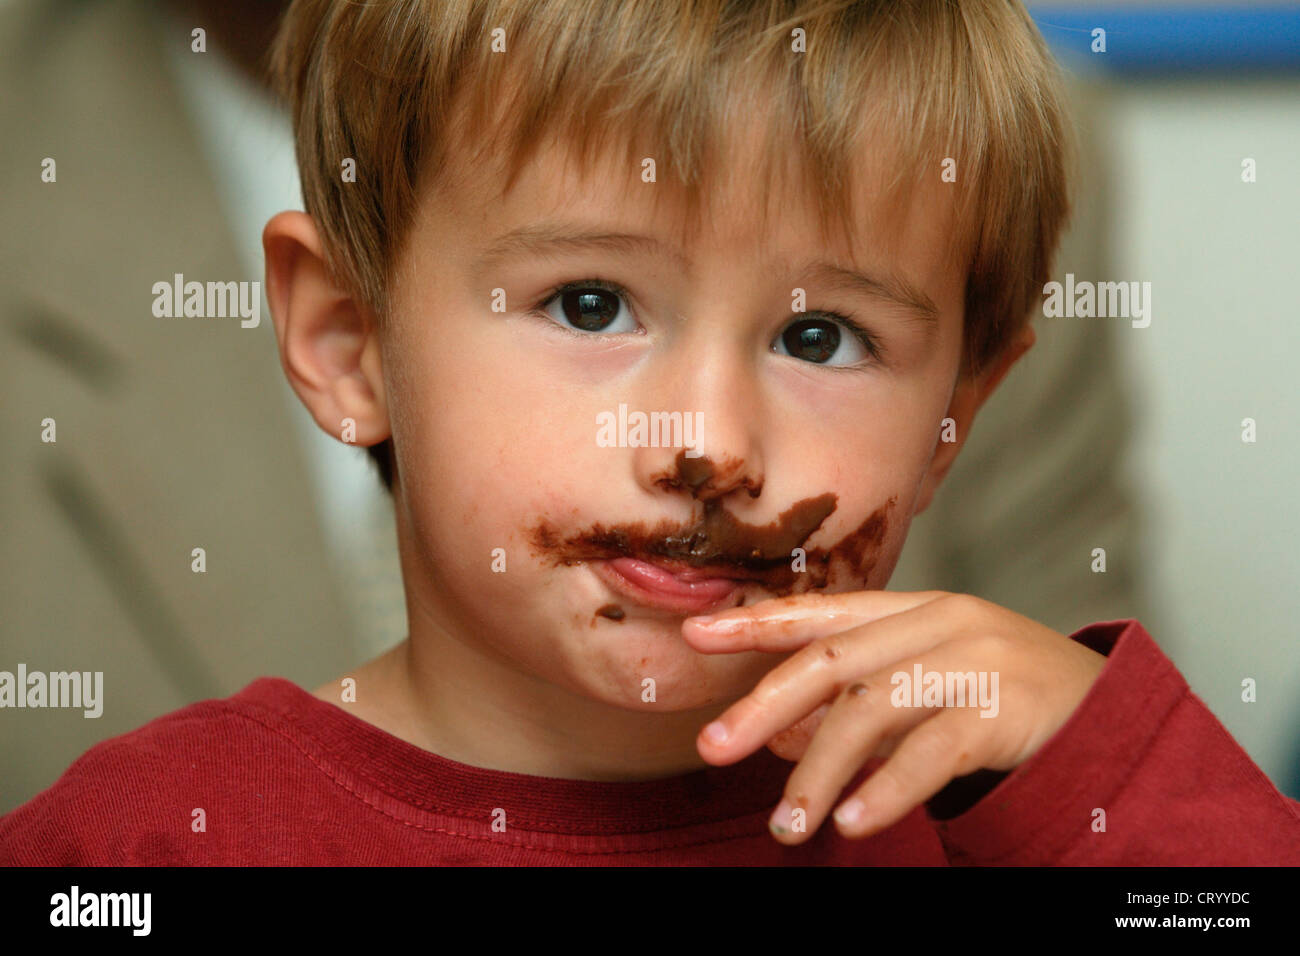 Boy with Chocolate Schnute Stock Photo